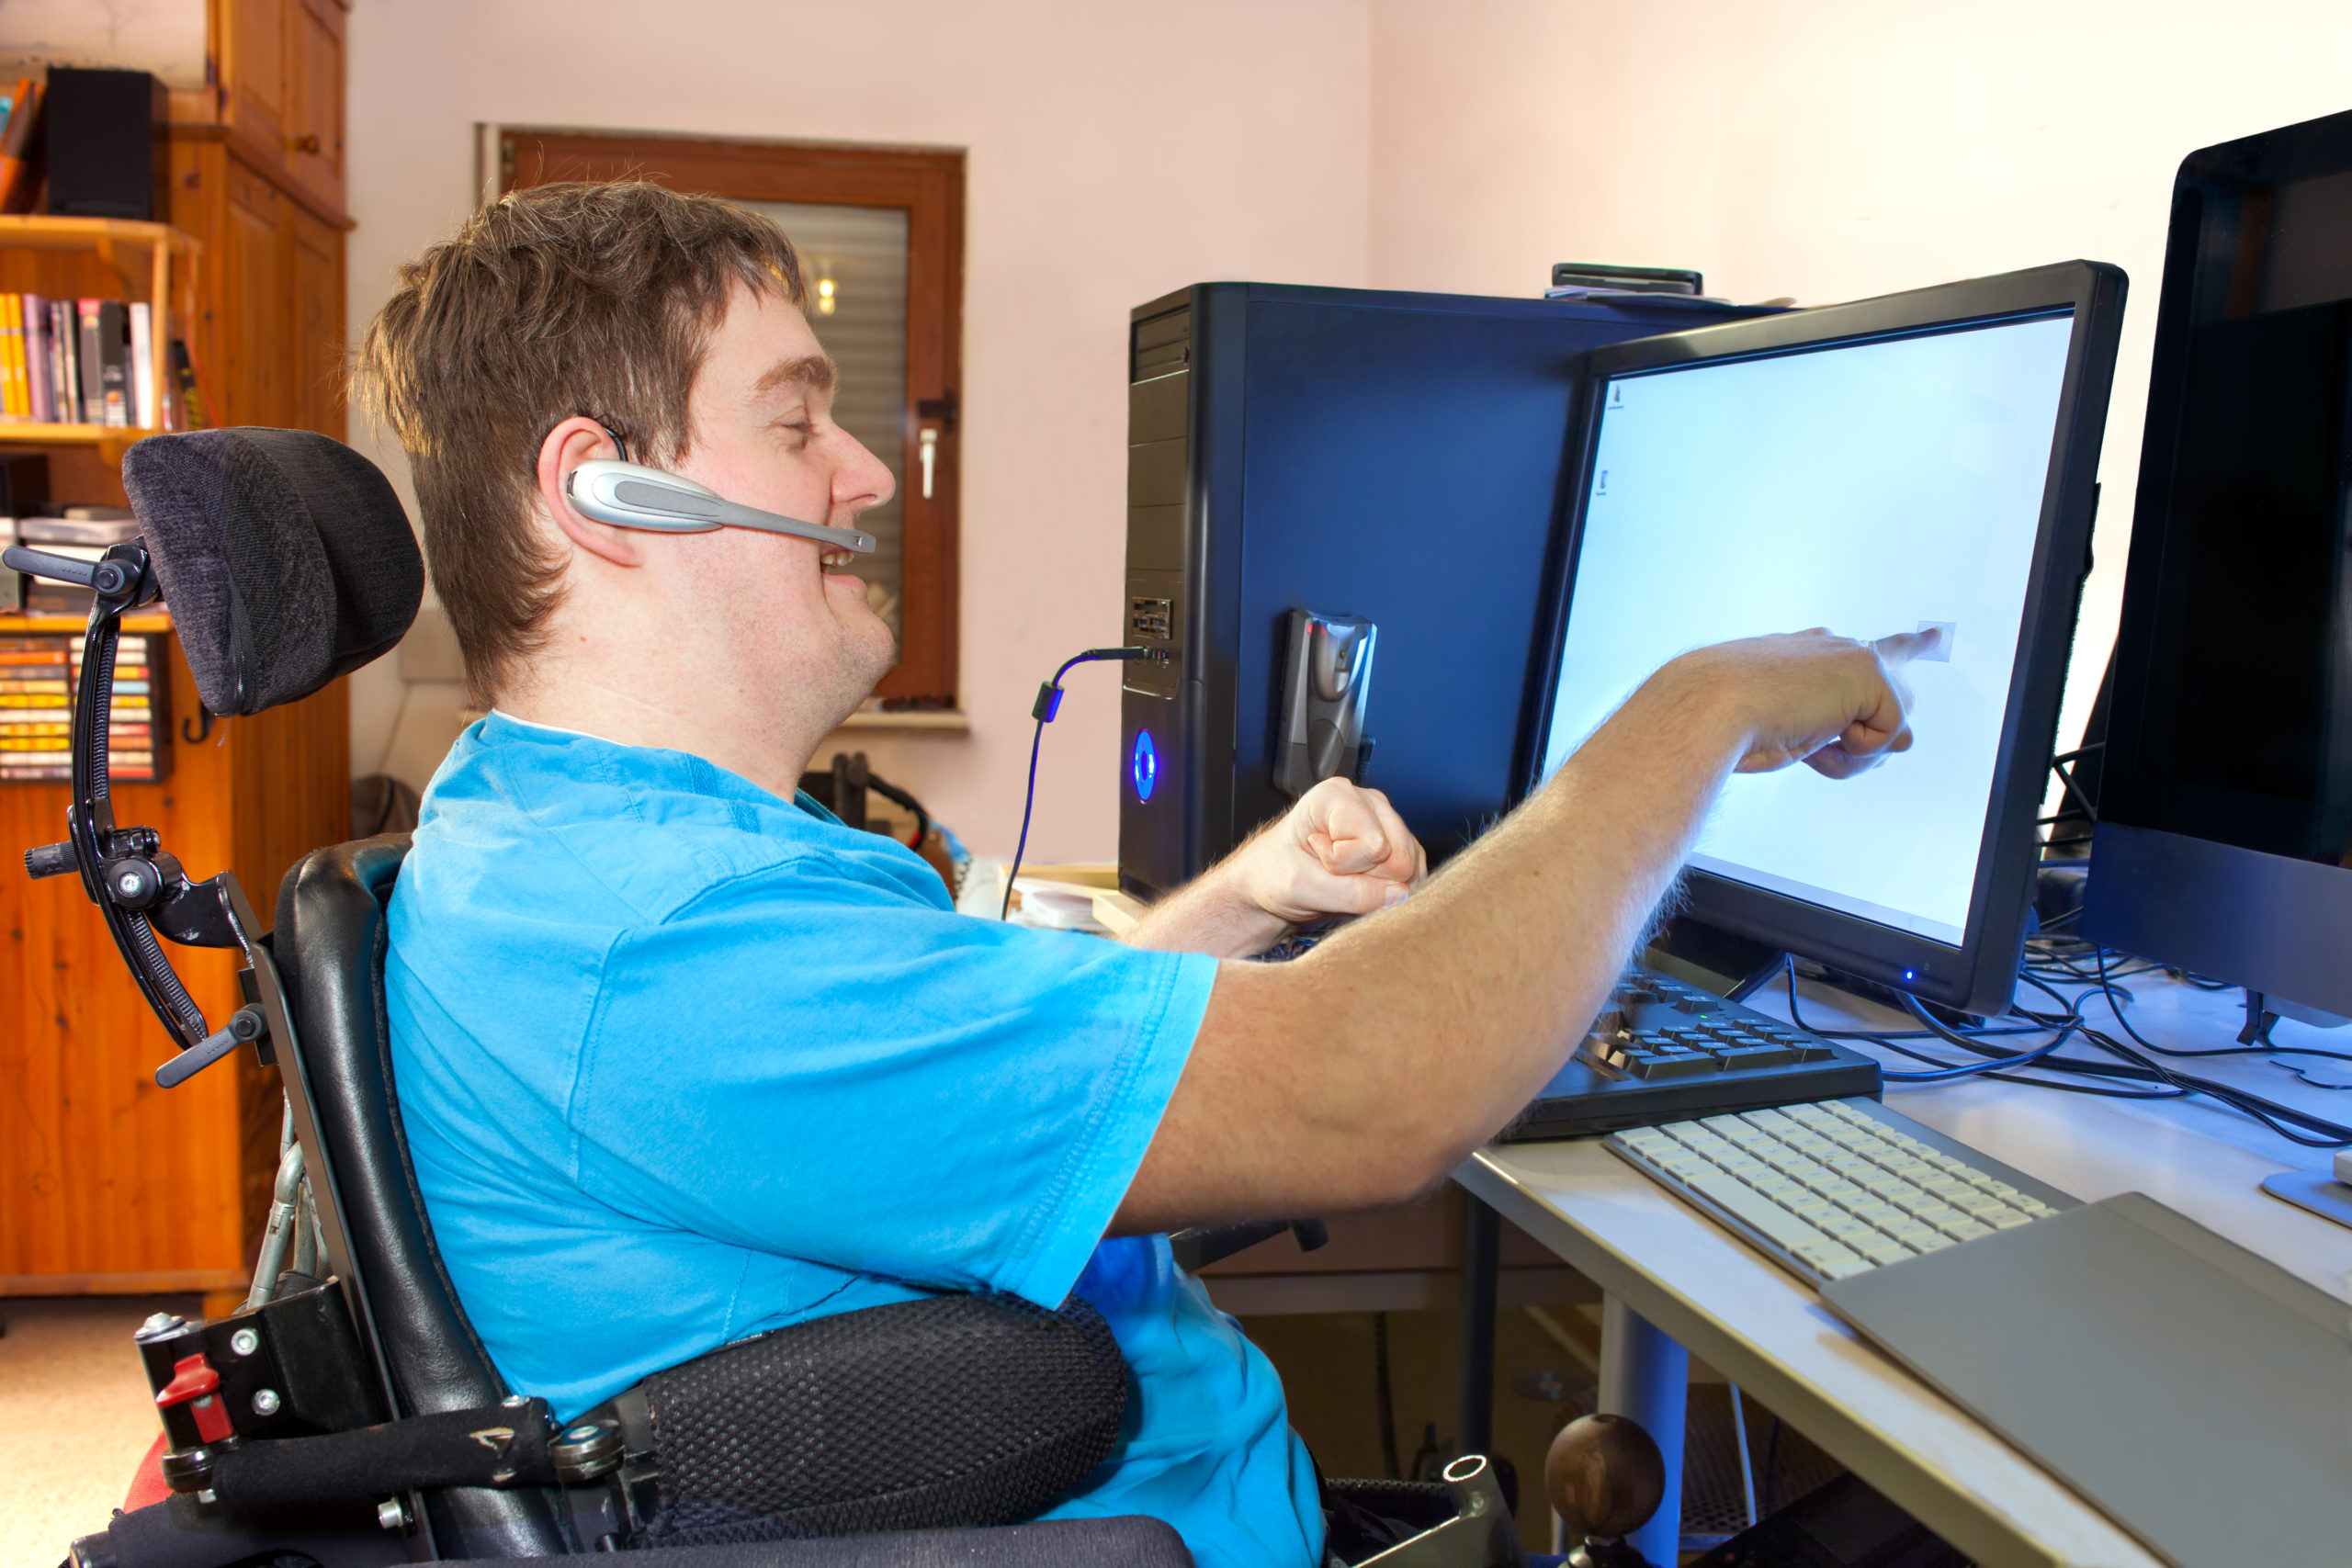 Image of a man with cerebral palsy in a wheelchair using adaptive technology on a computer. The man is wearing a blue tshirt and a bluetooth headset, and is smiling